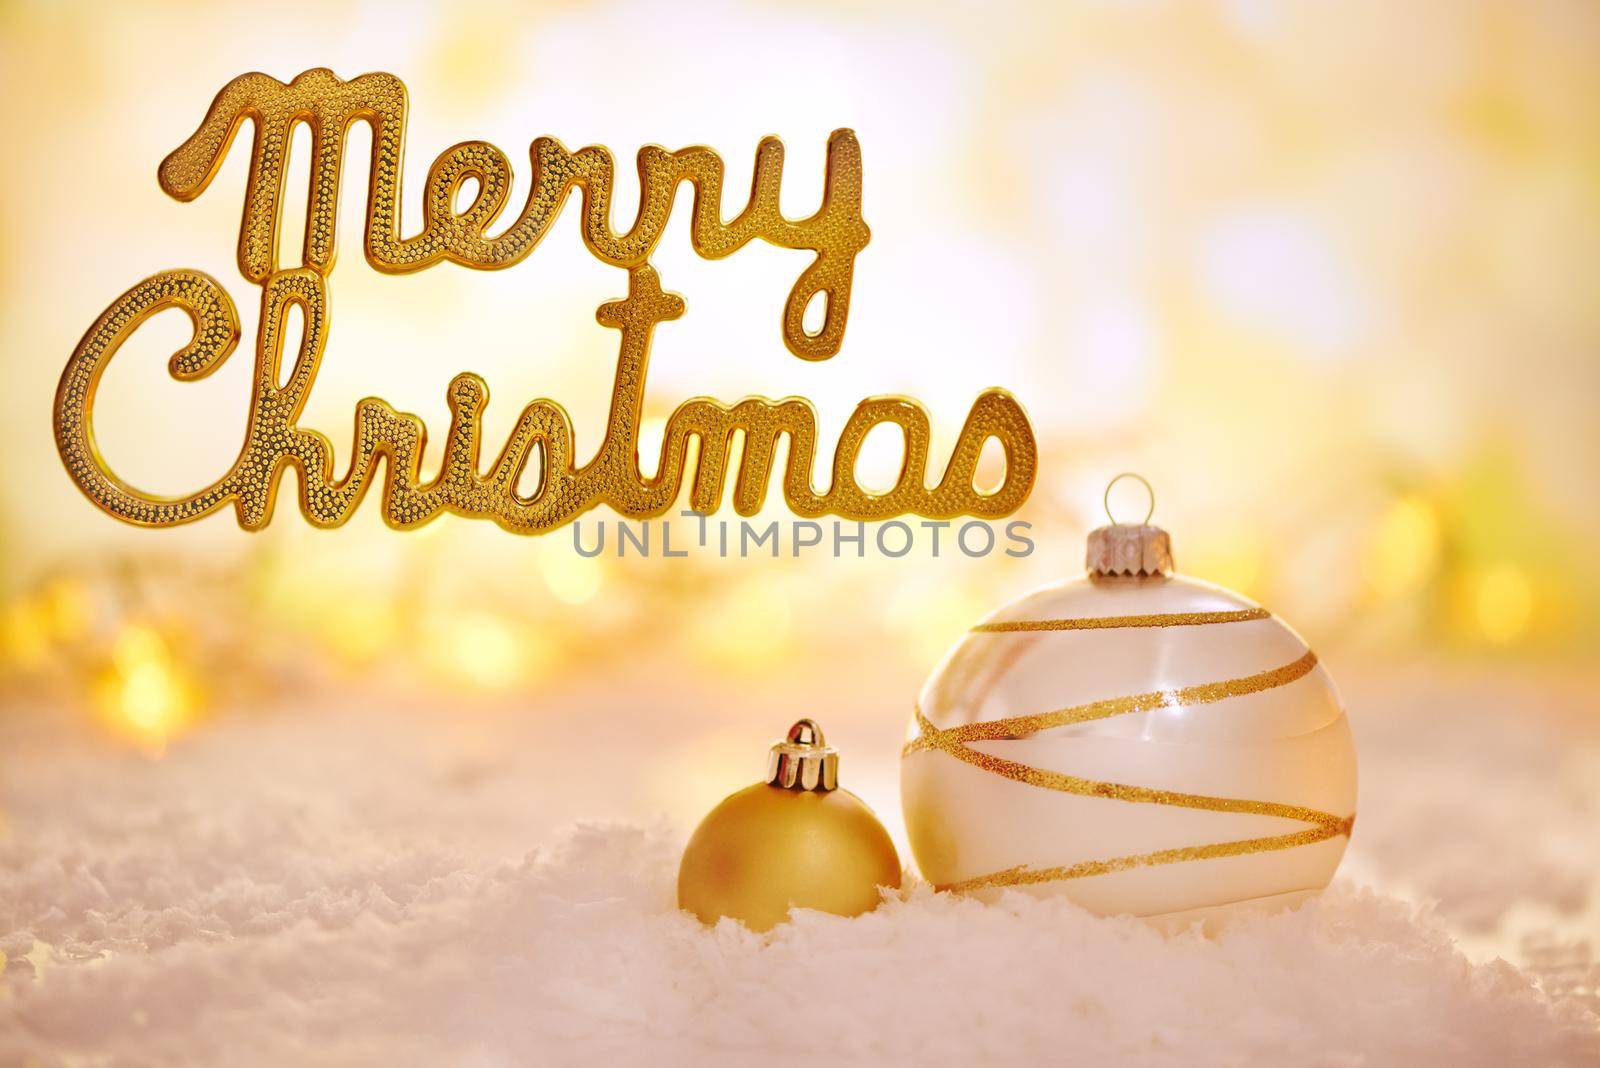 Merry christmas. Shot of golden Christmas decorations with a merry christmas message. by YuriArcurs